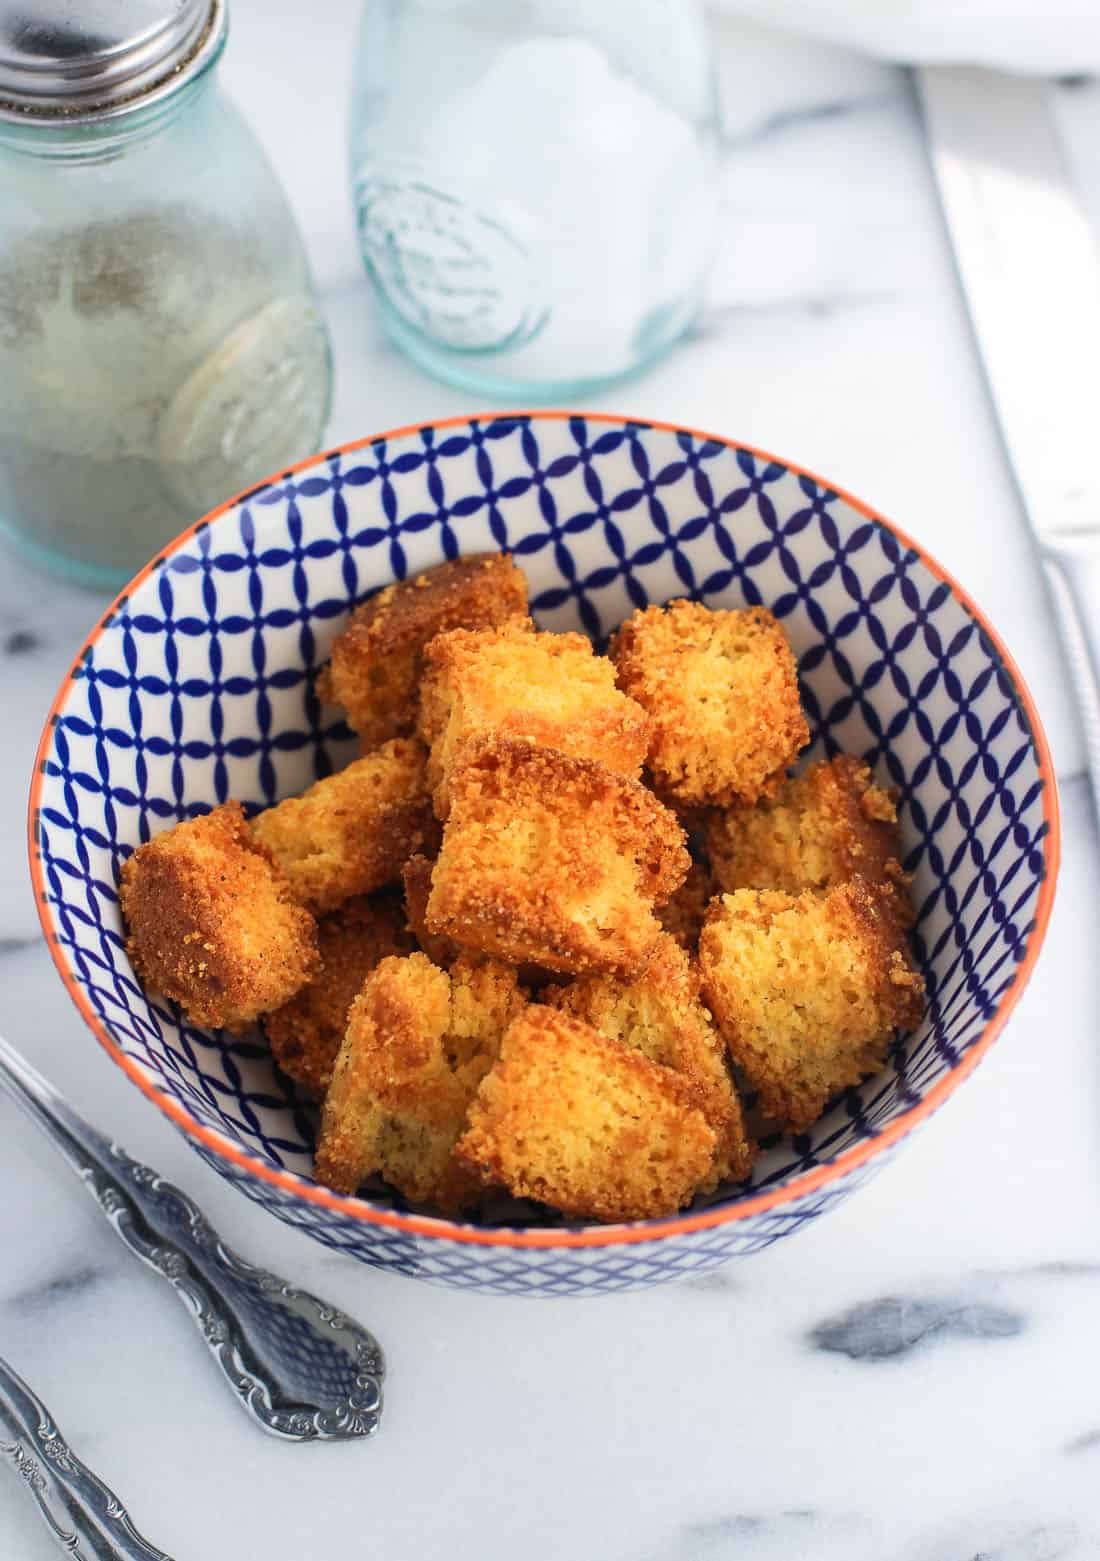 Croutons in a small ceramic bowl next to utensils and salt and pepper shakers